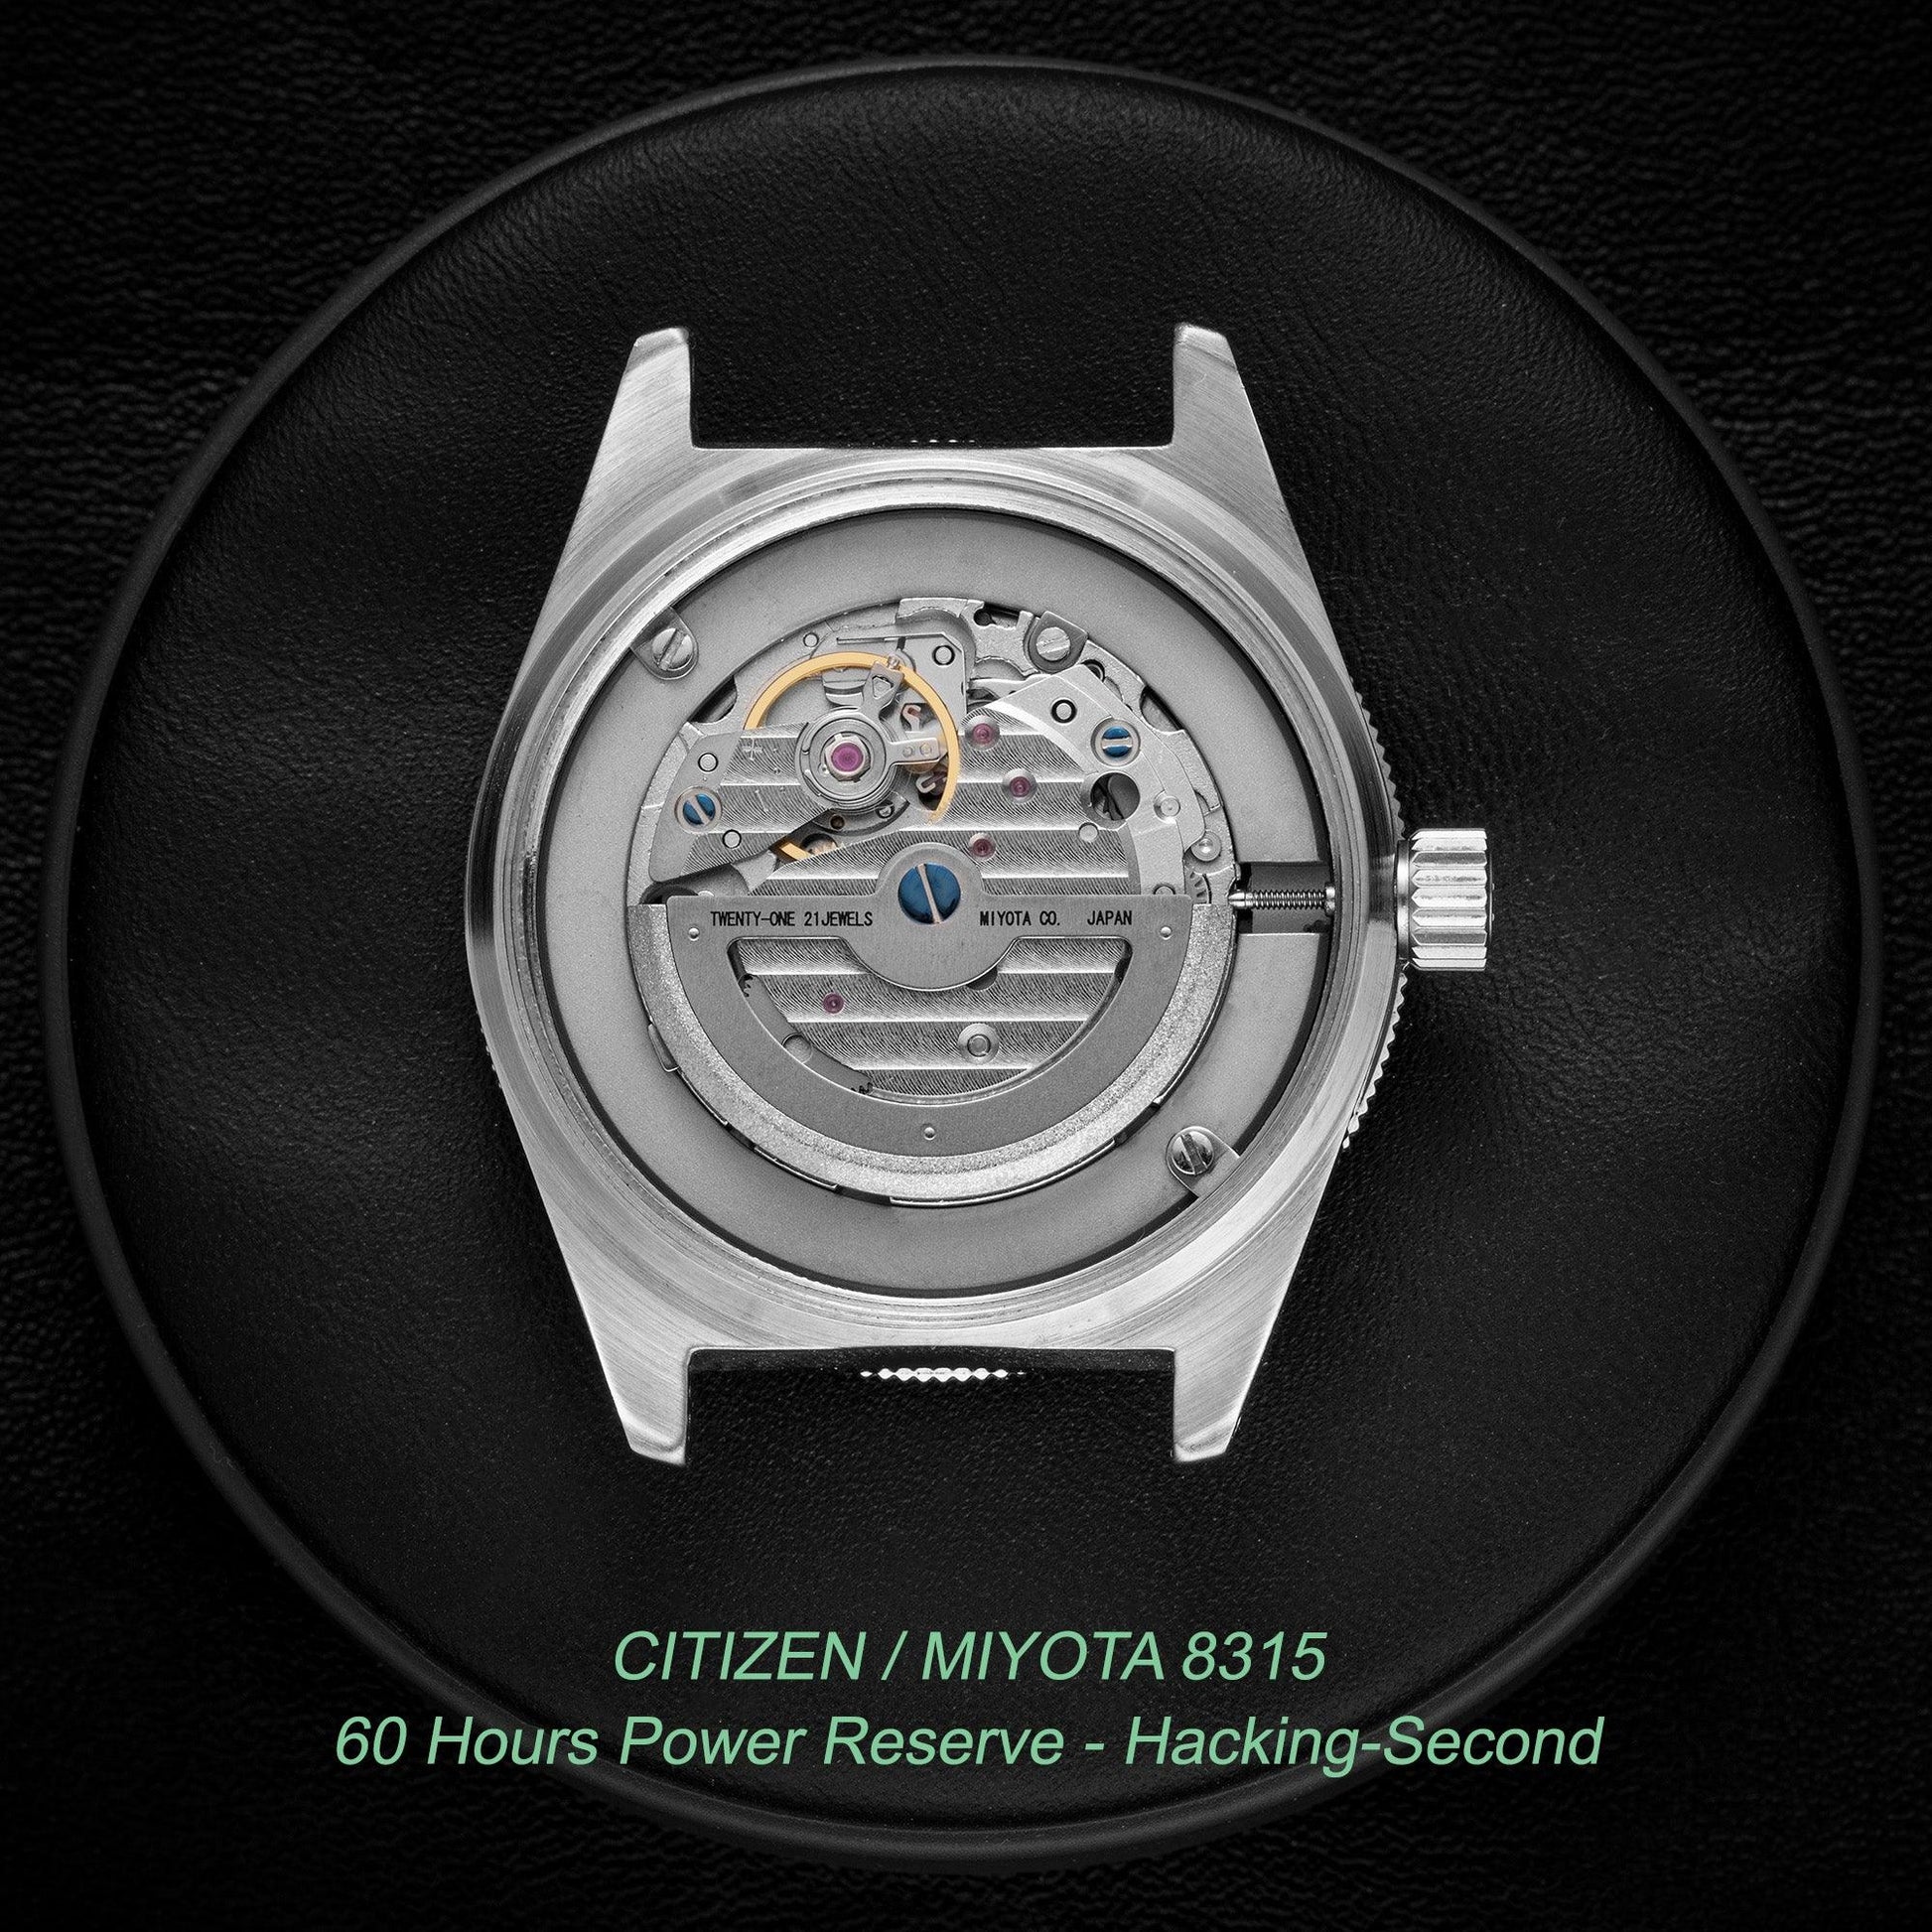 Miyota 8315 with 60 hours power reserve and hacking-second by Citizen